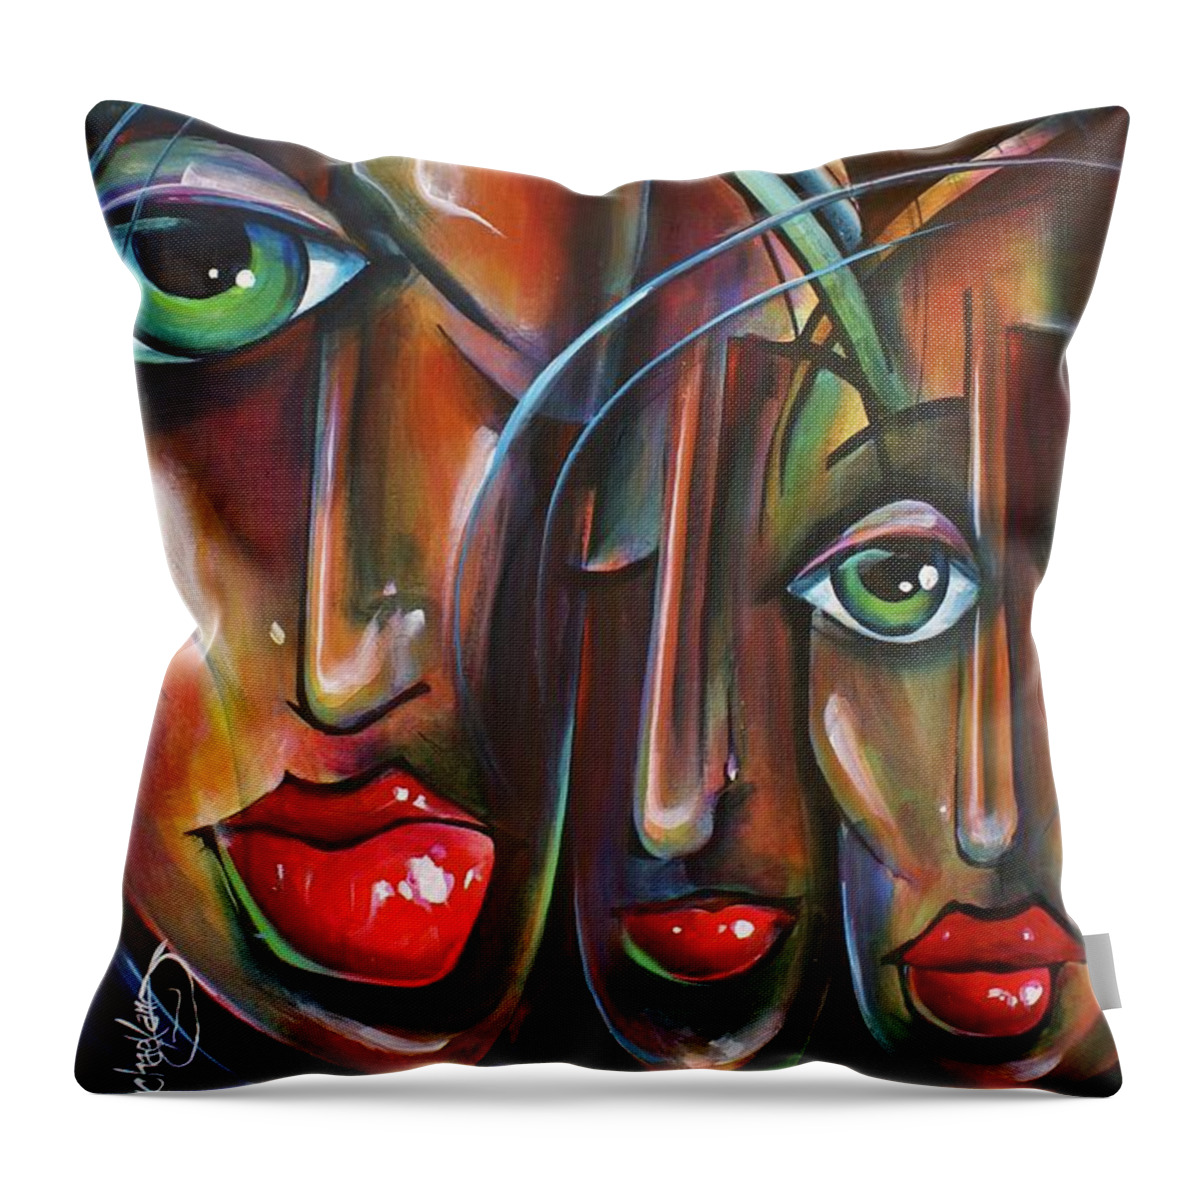 Urban Expressions Throw Pillow featuring the painting Shade by Michael Lang